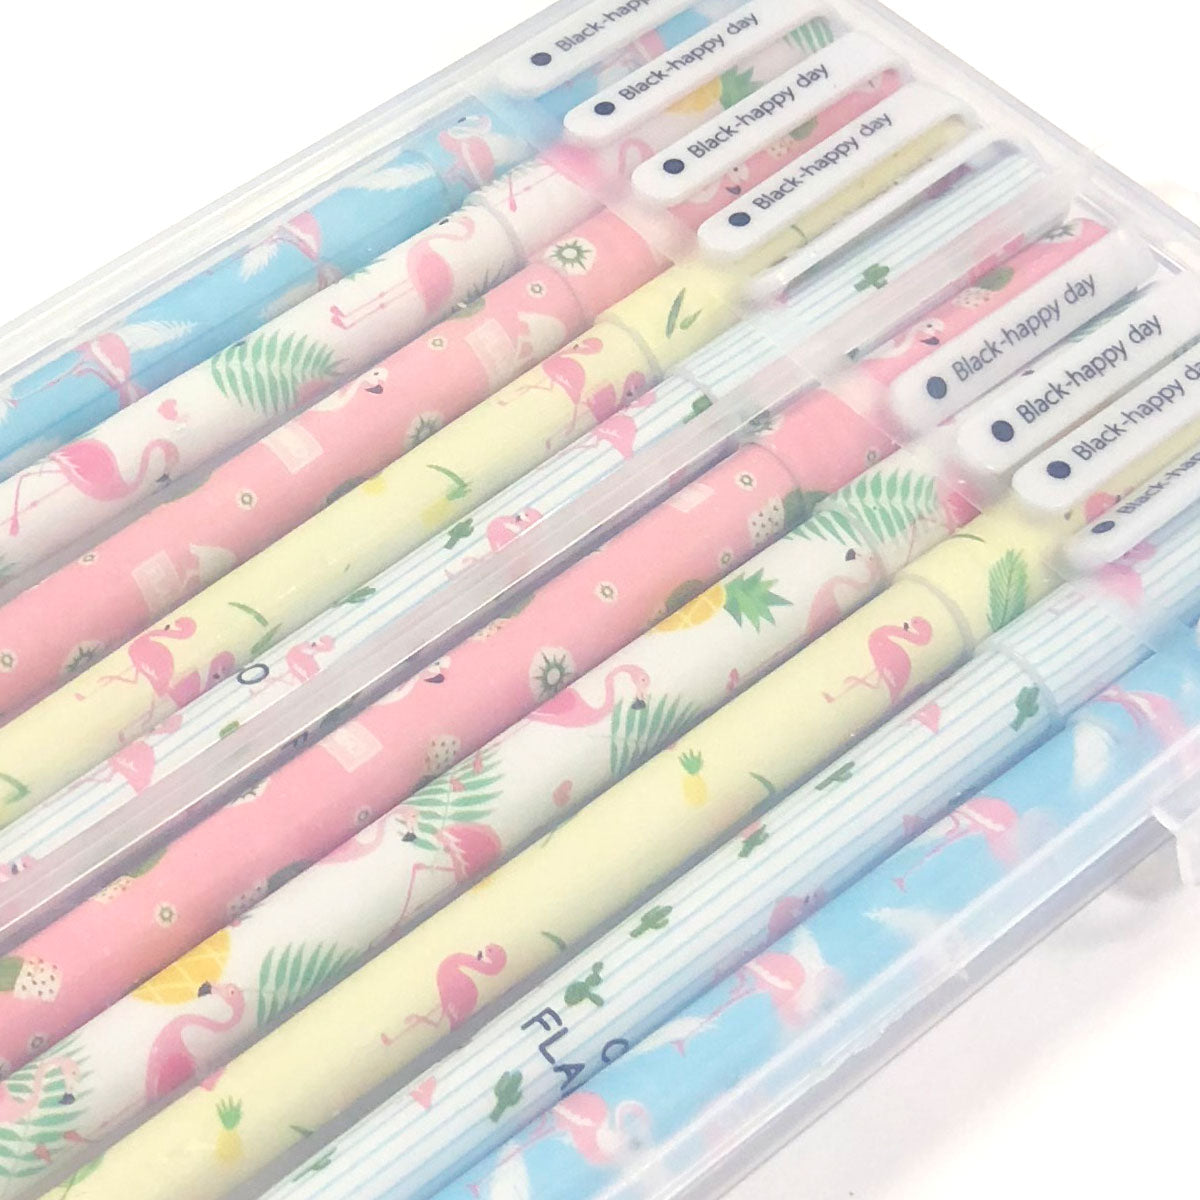 Wrapables Unicorn Flamingo Gel Ink Pens, 0.5mm Fine Point (Set of 10) for School, Office, Stationery